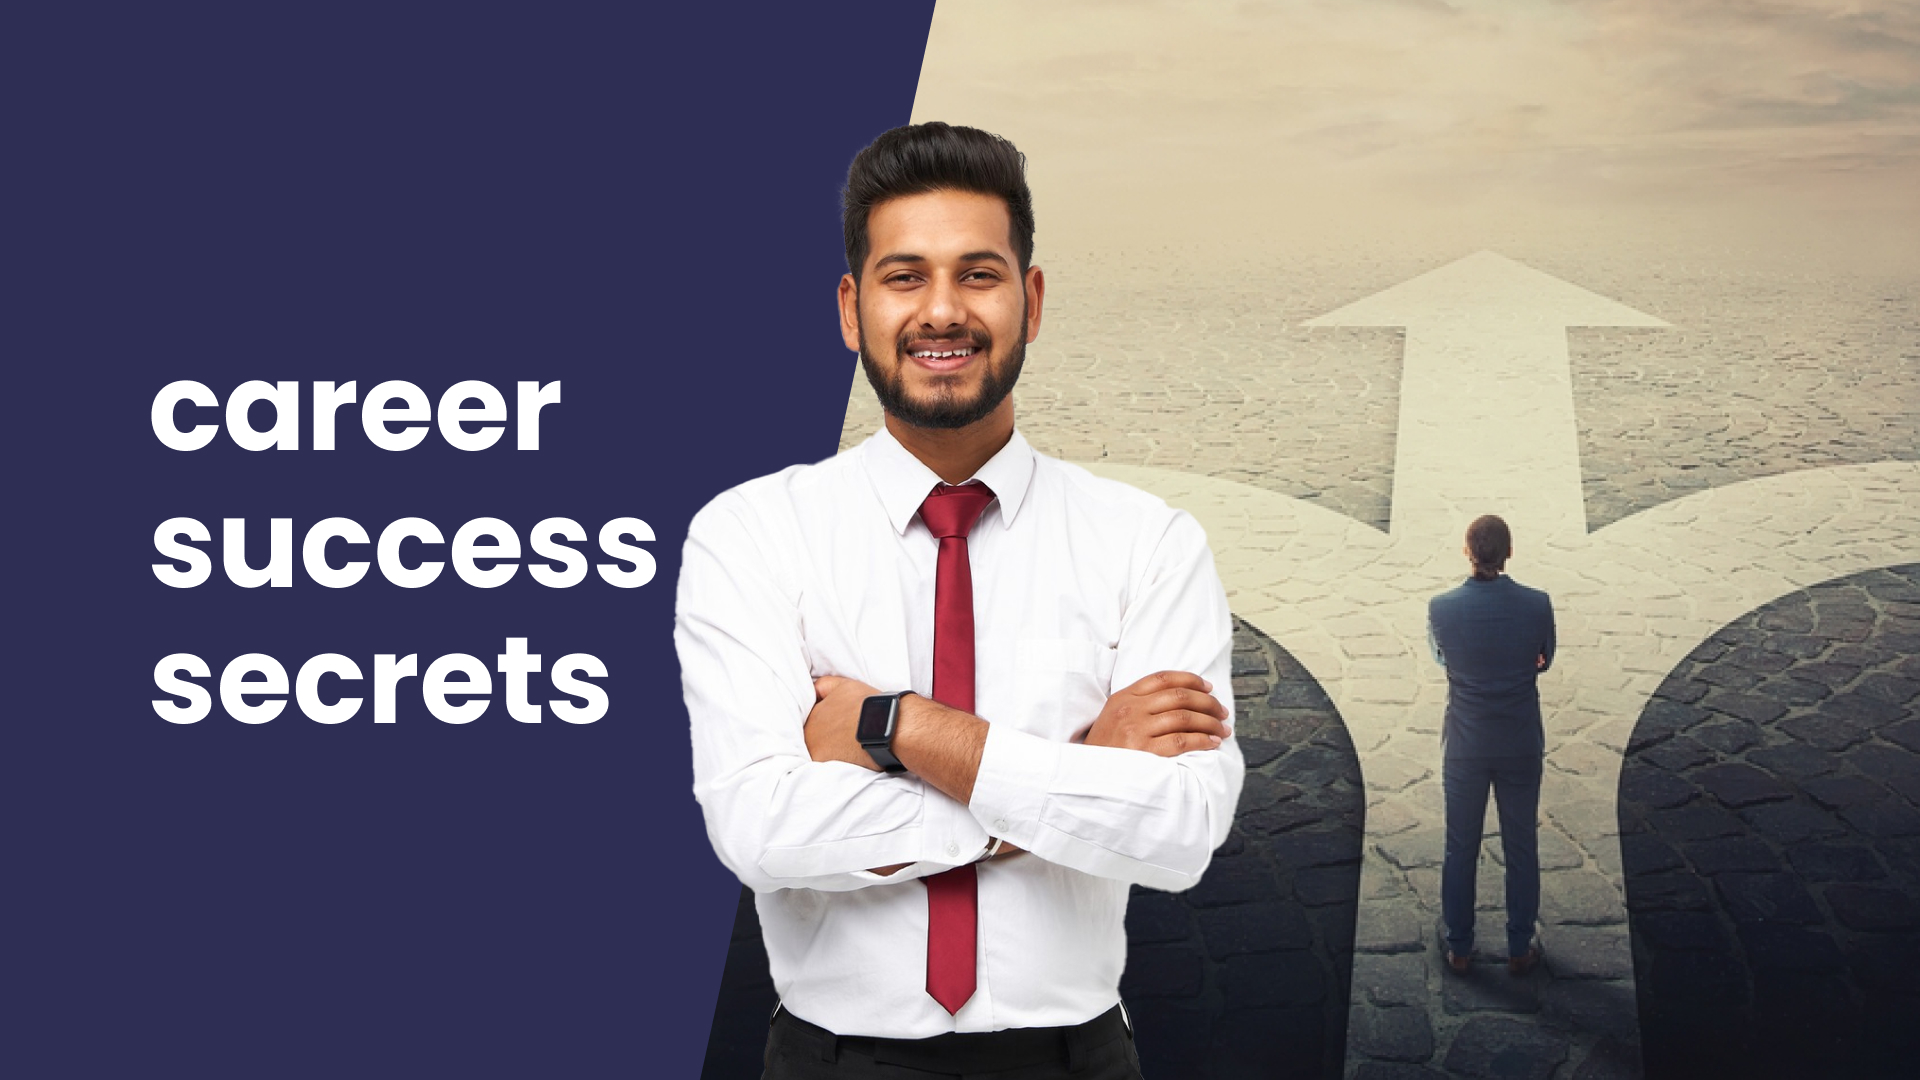 Course Trailer: Career Building Course - Learn the Secrets to Succeed in Your Career. Watch to know more.